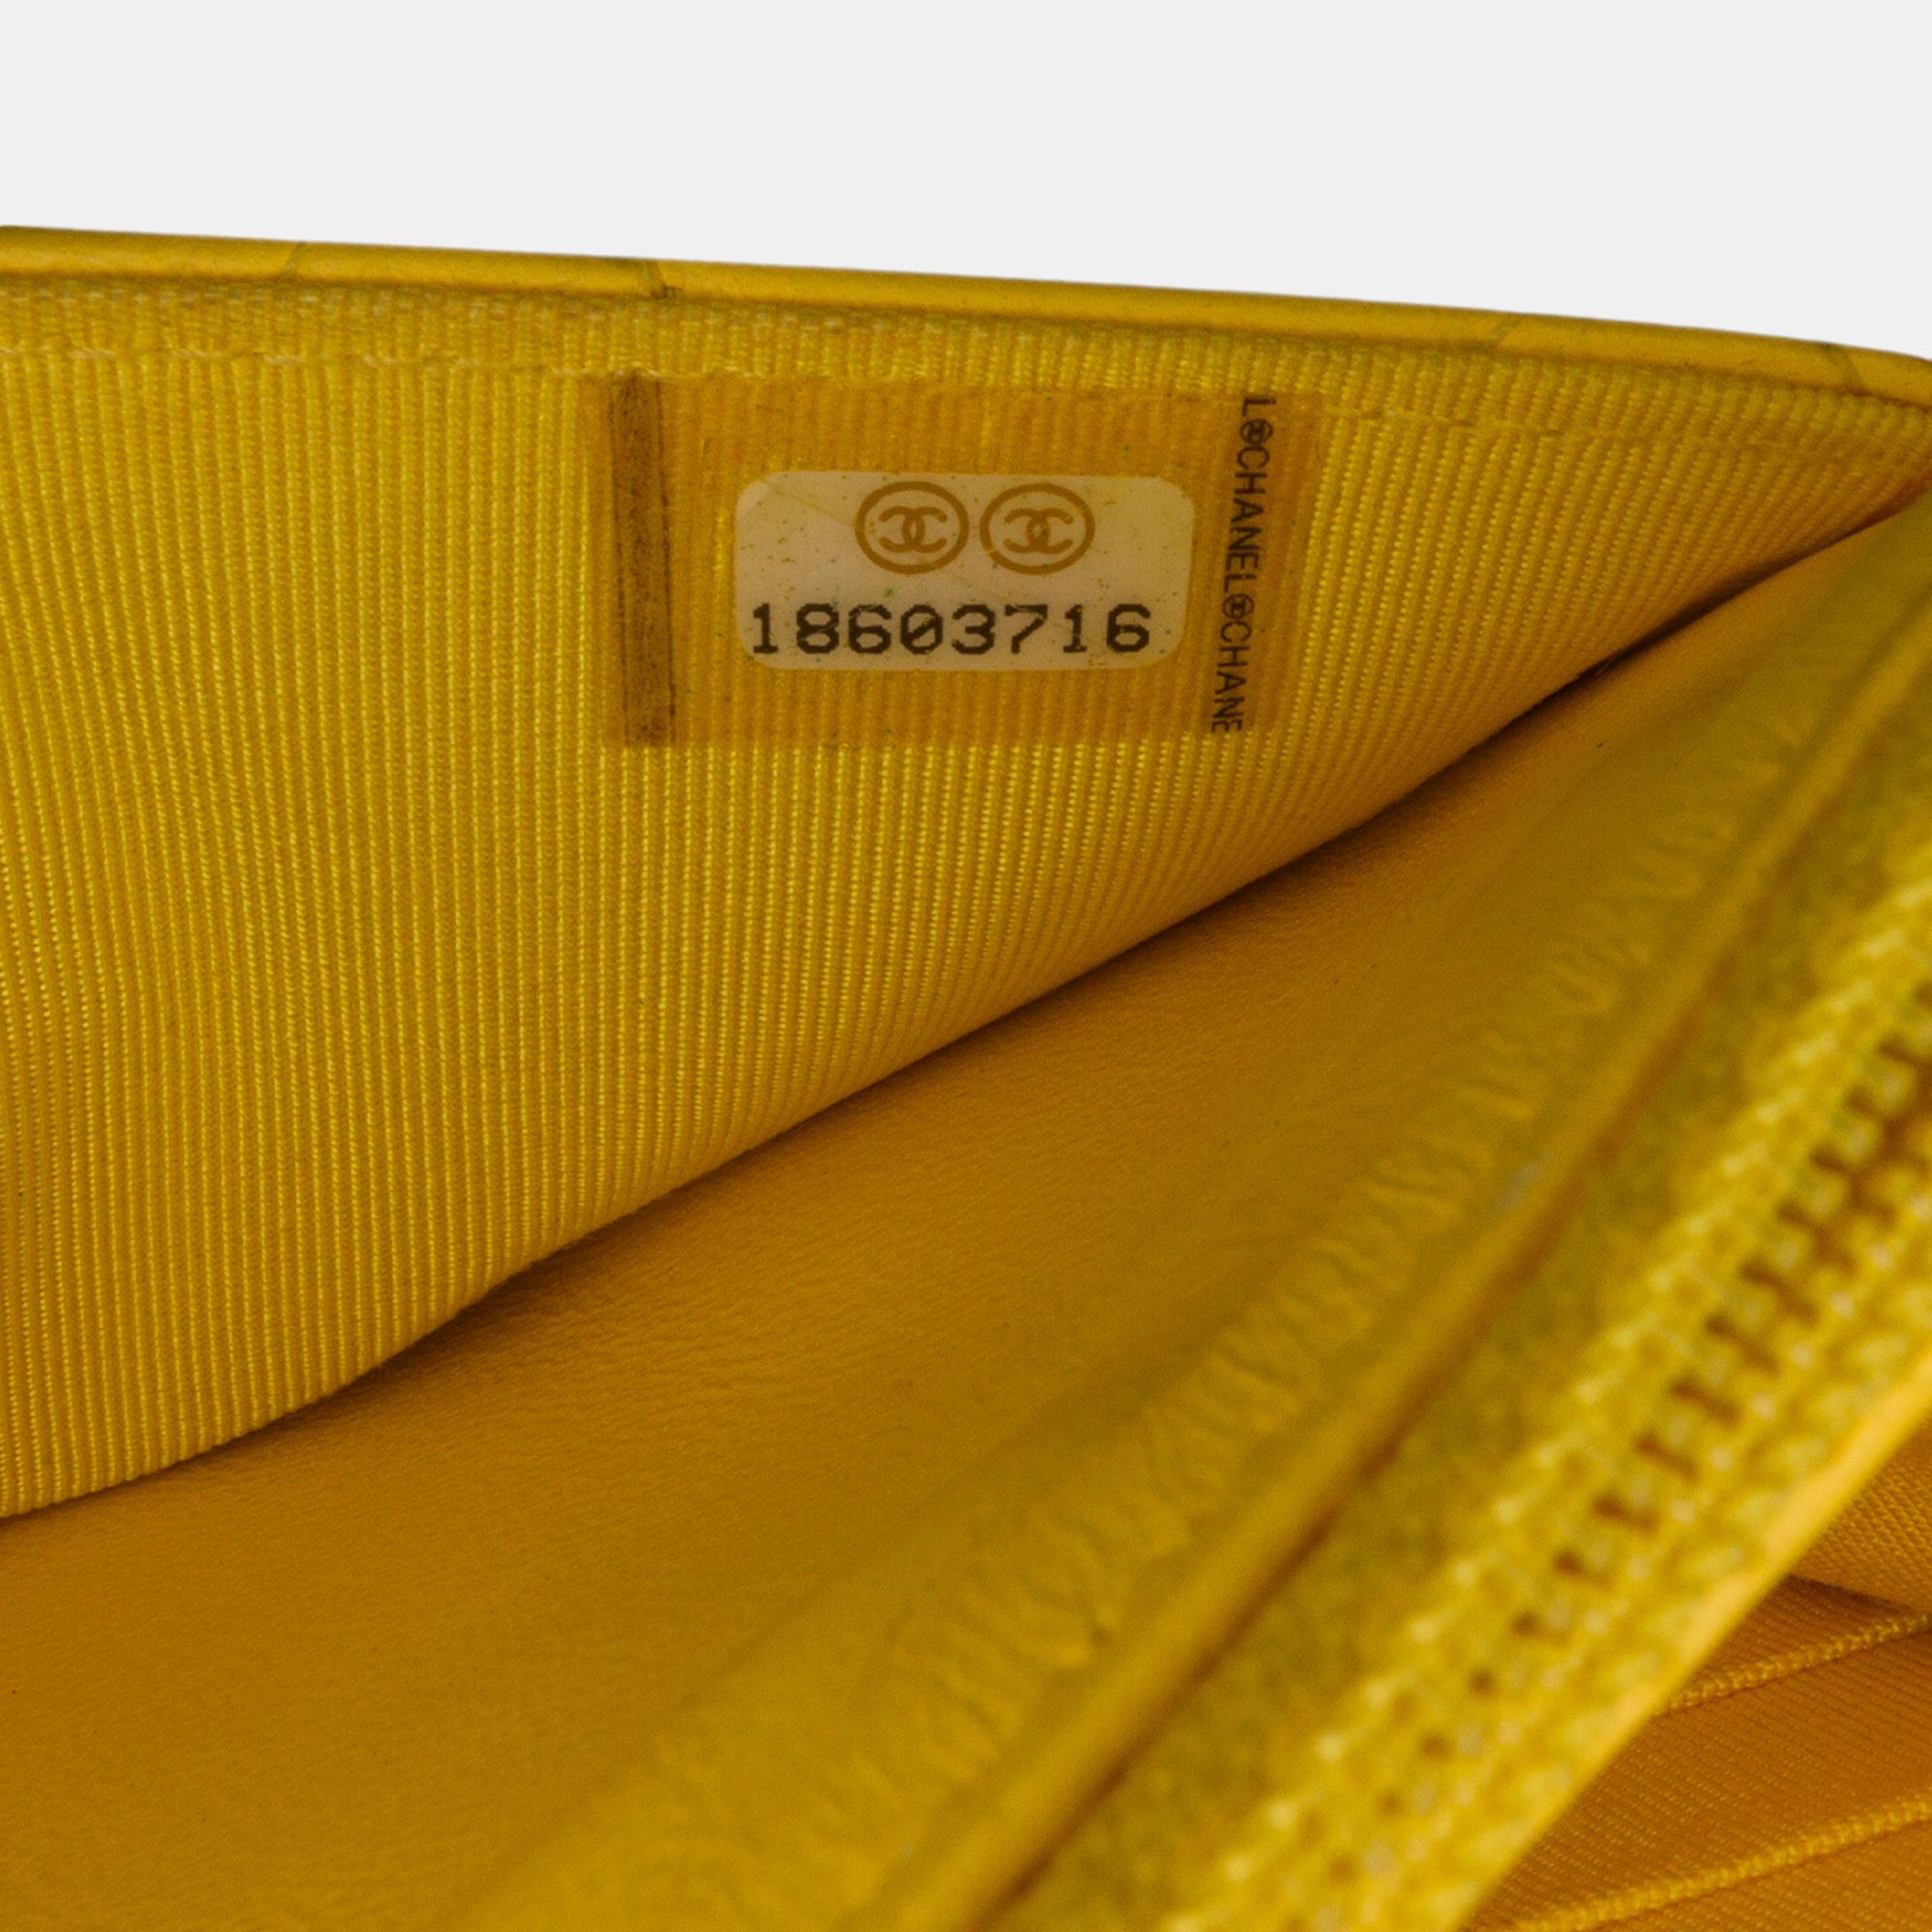 Chanel Yellow Classic Wallet On Chain